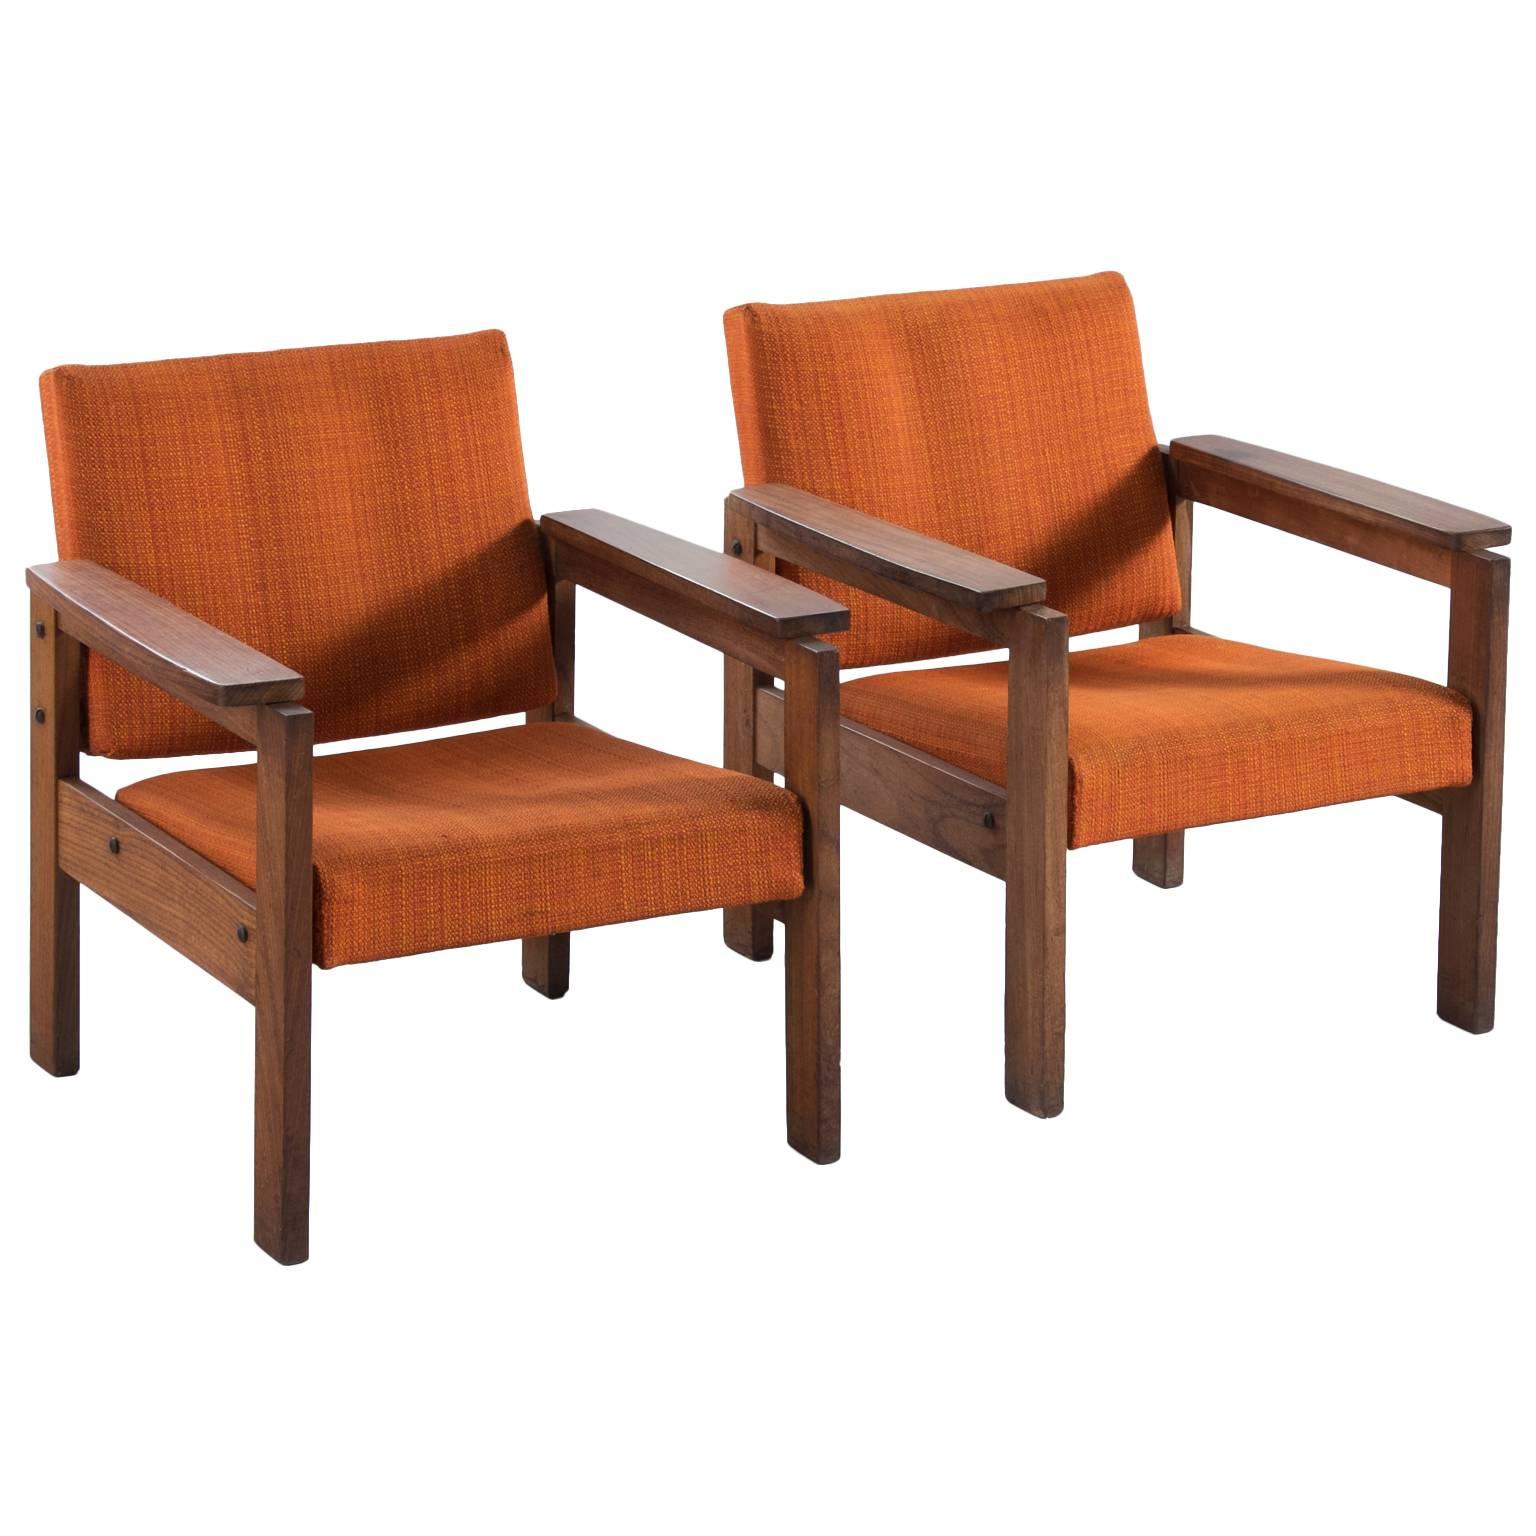 Pair of French Armchairs in Mahogany and Organe Fabric Upholstery